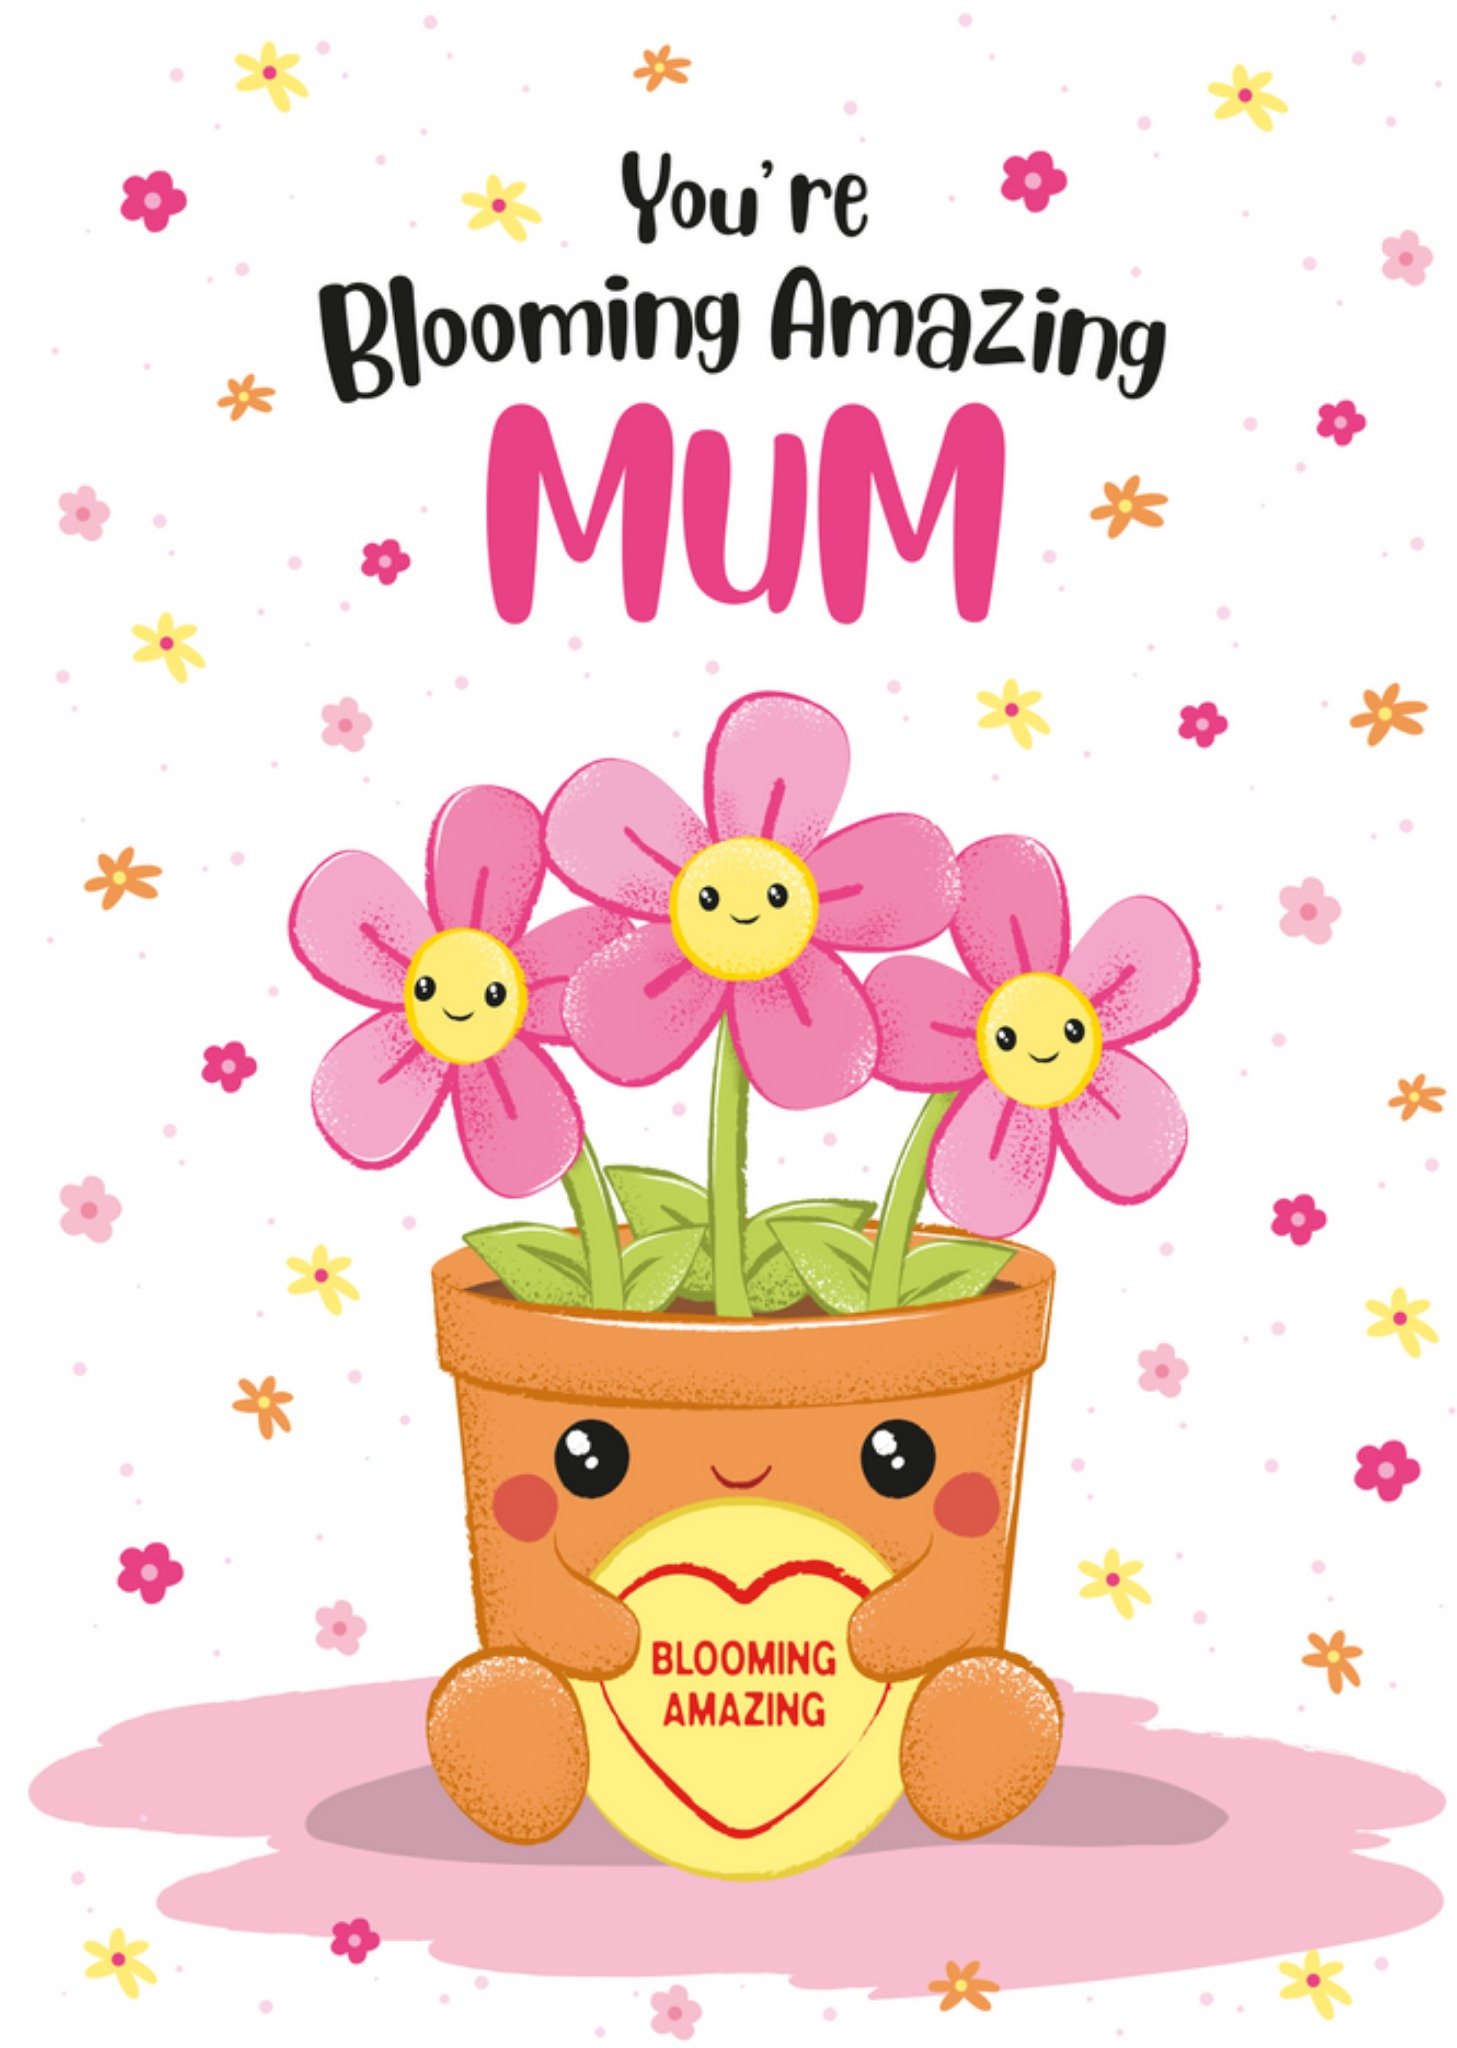 Swizzels Swizzles Love Hearts Posh Paws You're Blooming Amazing Mum Illustrated Cute Plant Pot Chara